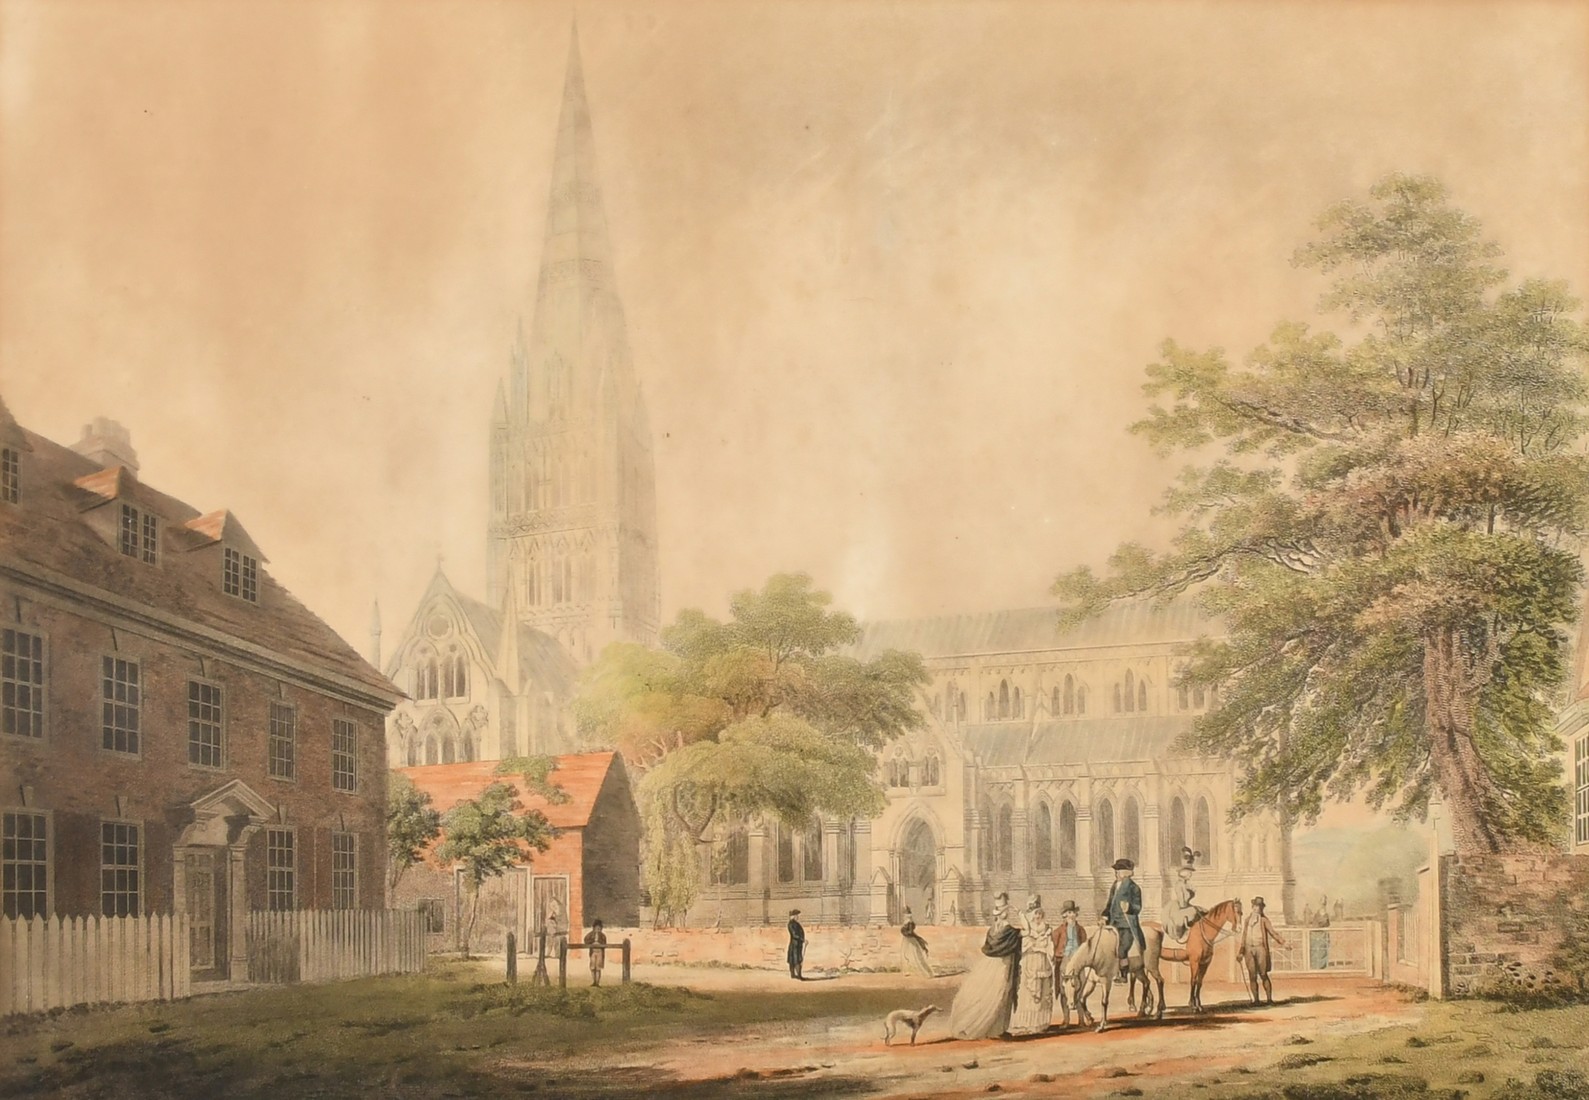 After Edward Dayes, Circa 1798, two views of Salisbury, a pair of hand-coloured prints, 12.5" x 18.